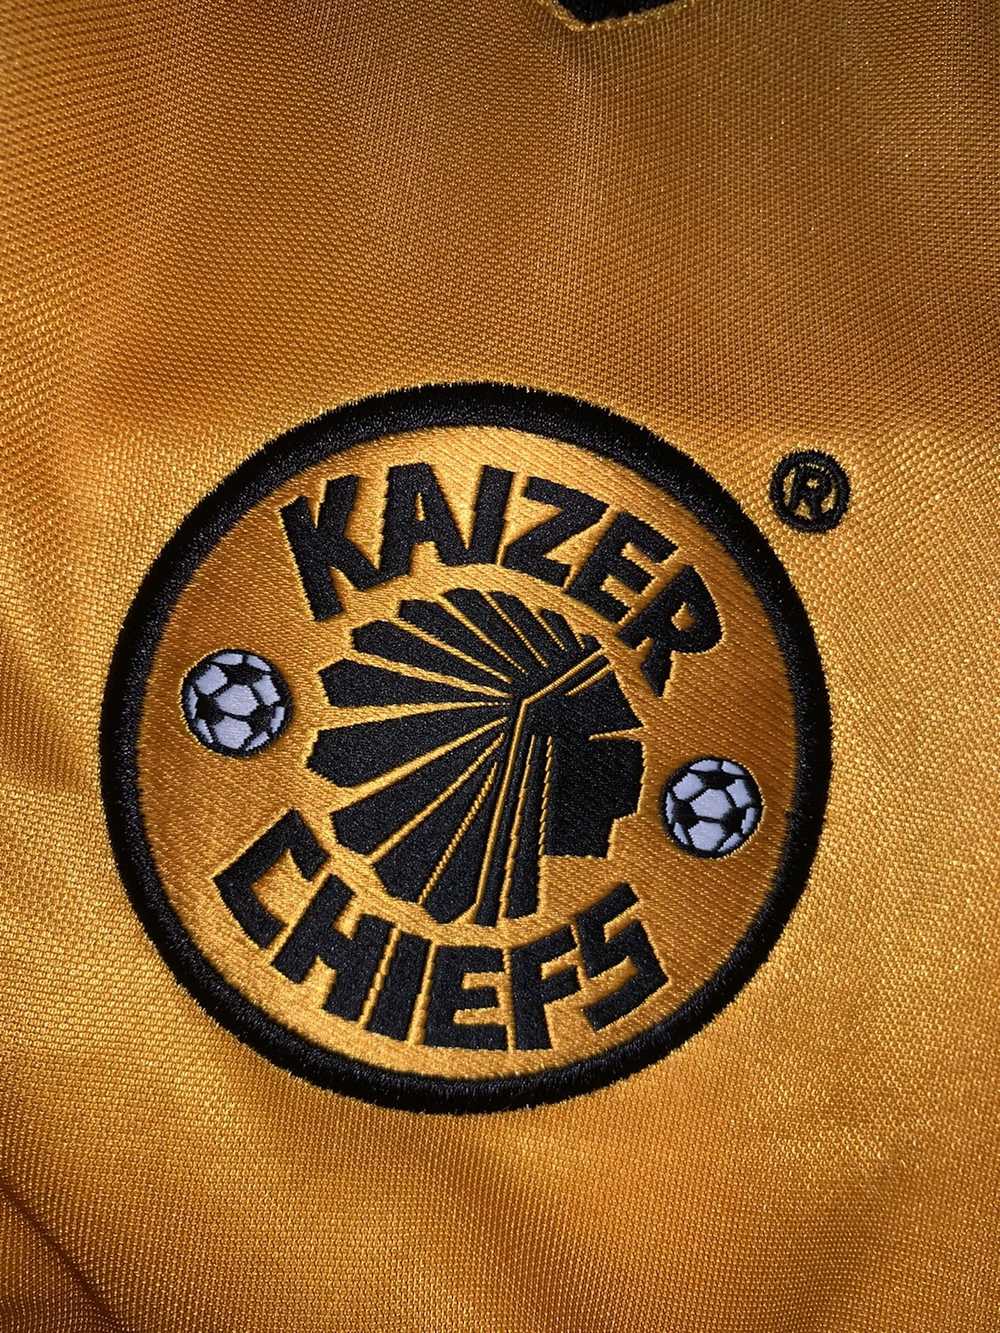 Soccer Jersey Rare Kaizer Chiefs home kit - image 2